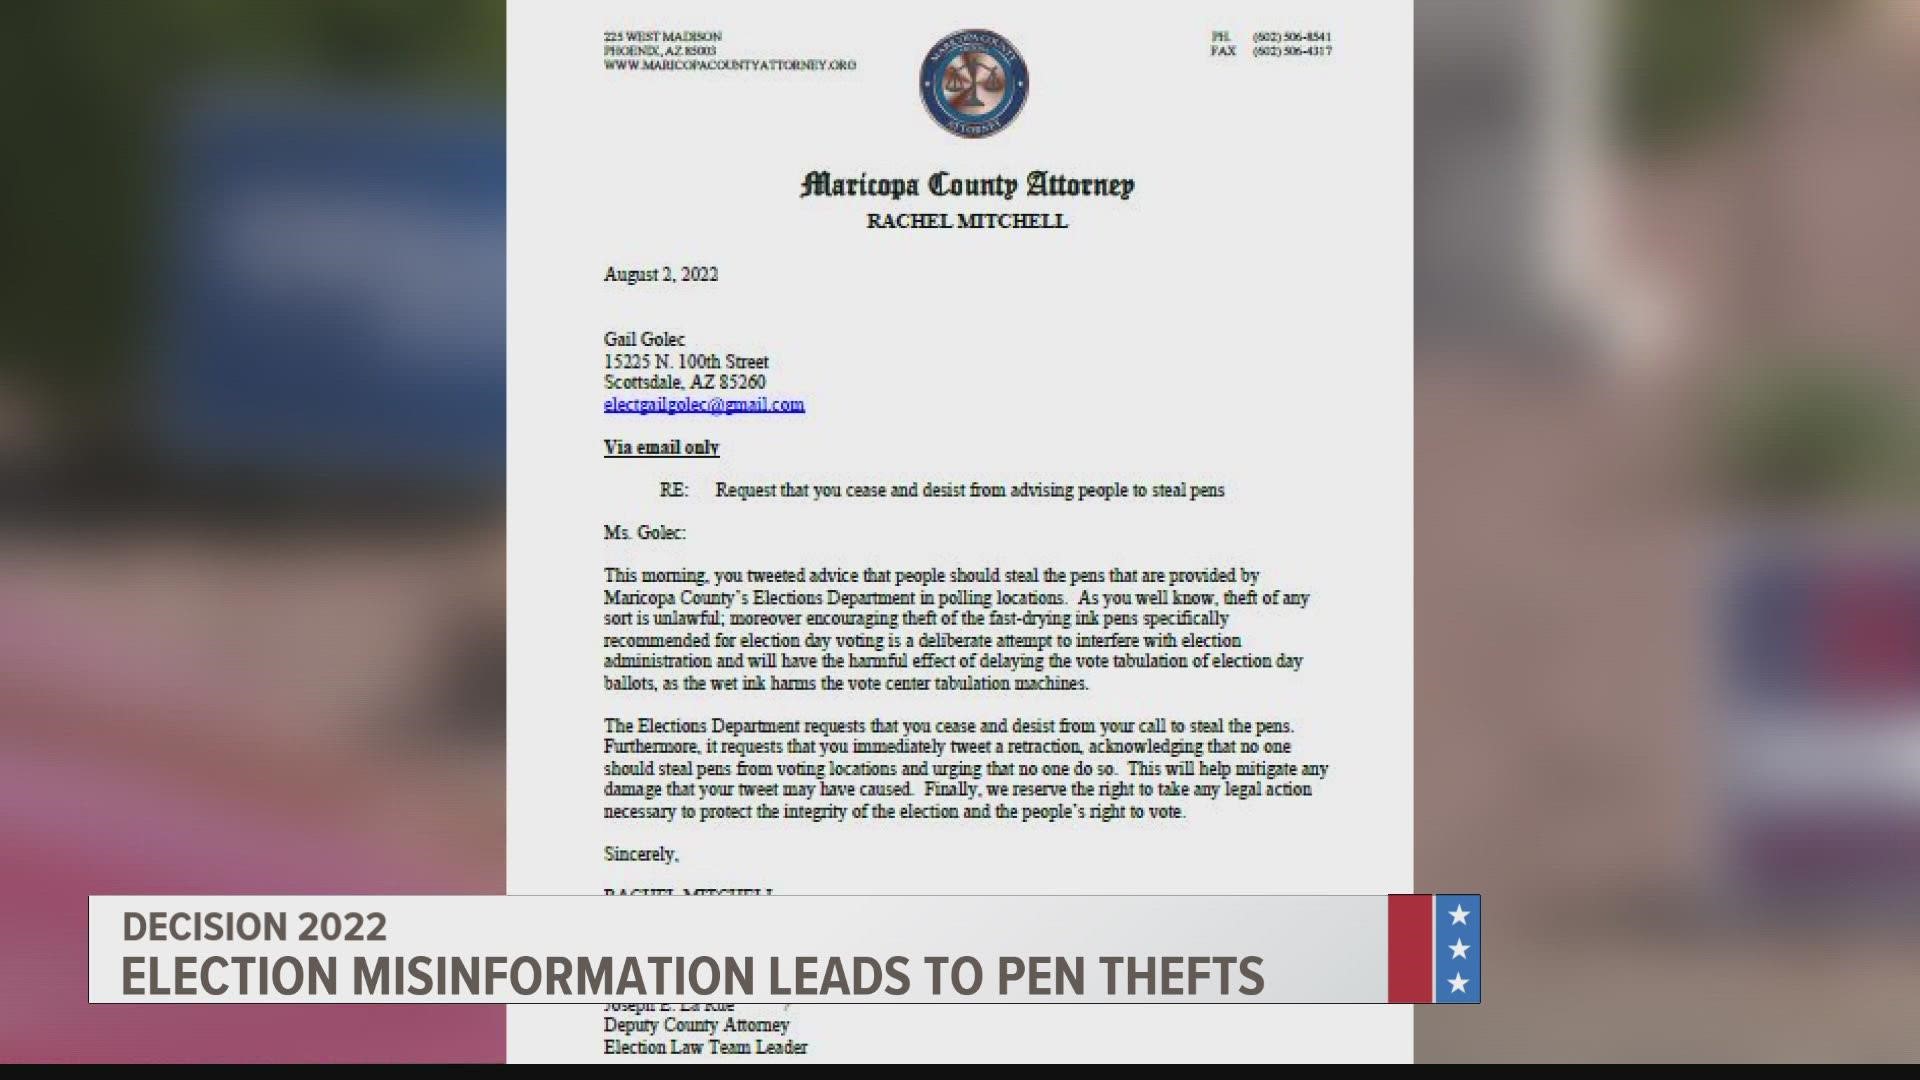 Maricopa County Attorney Rachel Mitchell sent a letter warning a local candidate to stop encouraging voters to take the pens given to them at polling places.